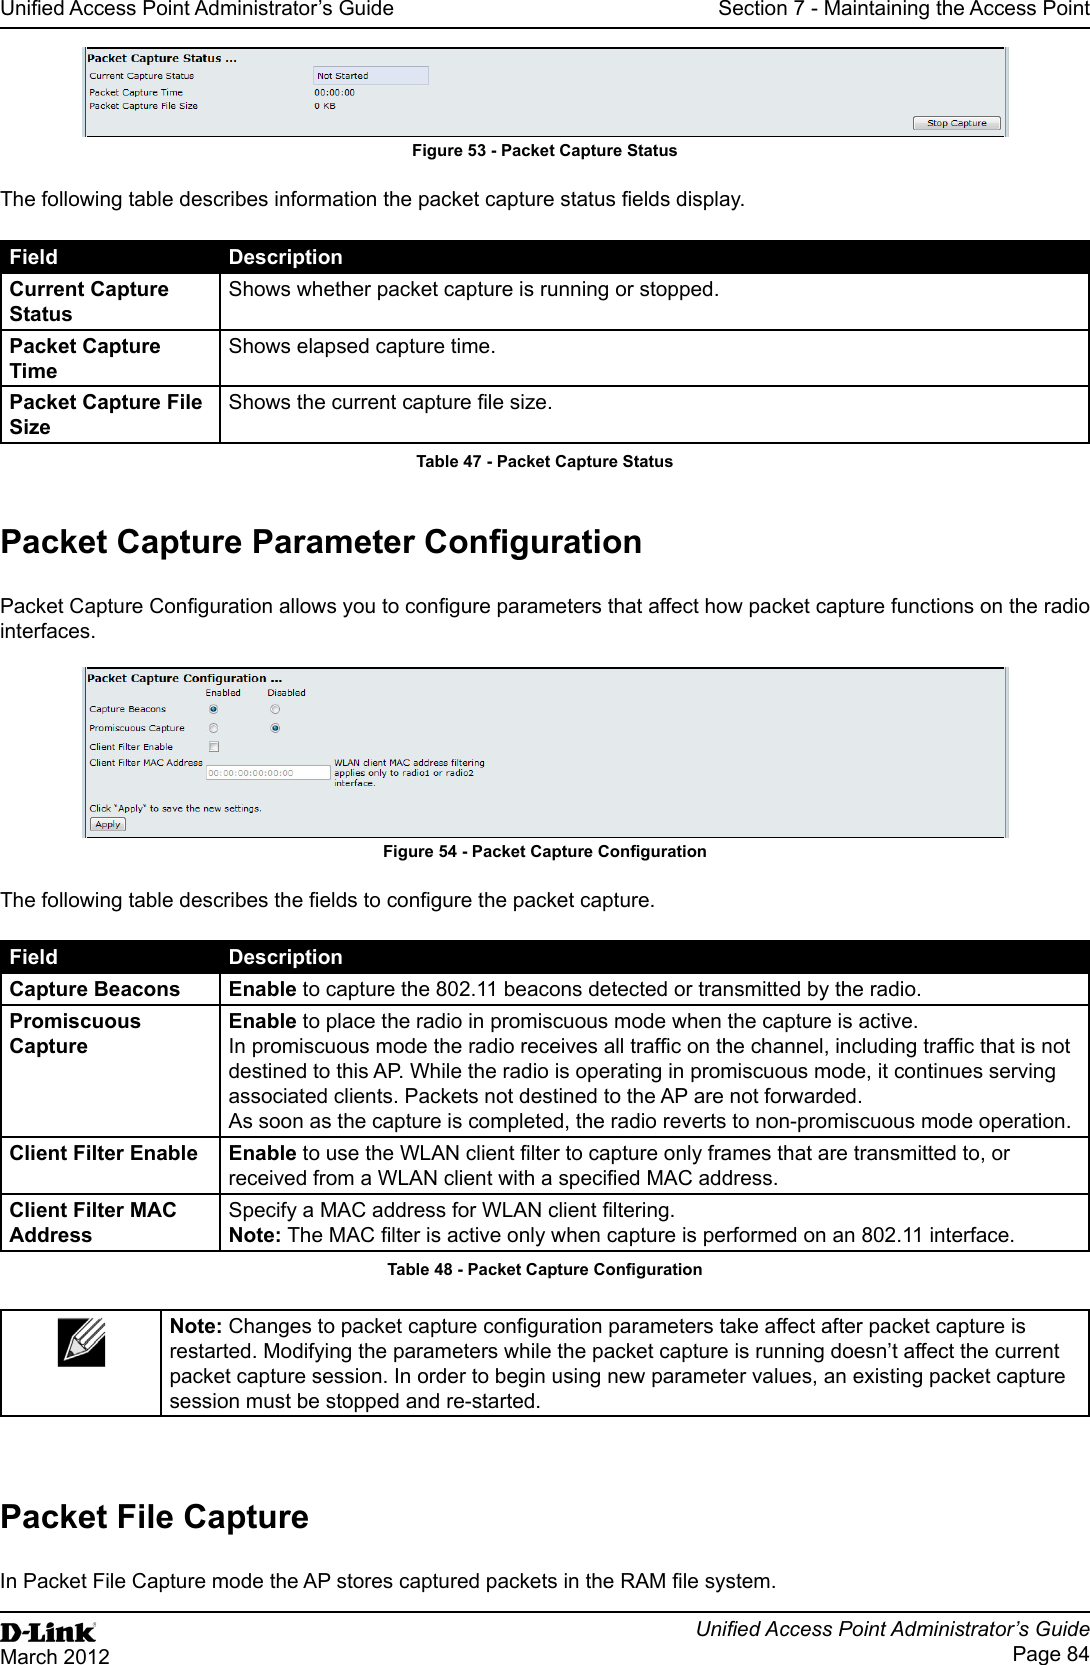 Unied Access Point Administrator’s GuideUnied Access Point Administrator’s GuidePage 84March 2012Section 7 - Maintaining the Access PointFigure 53 - Packet Capture StatusThe following table describes information the packet capture status elds display.Field DescriptionCurrent Capture StatusShows whether packet capture is running or stopped.Packet Capture TimeShows elapsed capture time.Packet Capture File SizeShows the current capture le size.Table 47 - Packet Capture StatusPacket Capture Parameter CongurationPacket Capture Conguration allows you to congure parameters that affect how packet capture functions on the radio interfaces.Figure 54 - Packet Capture CongurationThe following table describes the elds to congure the packet capture.Field DescriptionCapture Beacons Enable to capture the 802.11 beacons detected or transmitted by the radio.Promiscuous CaptureEnable to place the radio in promiscuous mode when the capture is active. In promiscuous mode the radio receives all trafc on the channel, including trafc that is not destined to this AP. While the radio is operating in promiscuous mode, it continues serving associated clients. Packets not destined to the AP are not forwarded. As soon as the capture is completed, the radio reverts to non-promiscuous mode operation.Client Filter Enable Enable to use the WLAN client lter to capture only frames that are transmitted to, or received from a WLAN client with a specied MAC address.Client Filter MAC AddressSpecify a MAC address for WLAN client ltering.Note: The MAC lter is active only when capture is performed on an 802.11 interface.Table 48 - Packet Capture CongurationNote: Changes to packet capture conguration parameters take affect after packet capture is restarted. Modifying the parameters while the packet capture is running doesn’t affect the current packet capture session. In order to begin using new parameter values, an existing packet capture session must be stopped and re-started.Packet File CaptureIn Packet File Capture mode the AP stores captured packets in the RAM le system.